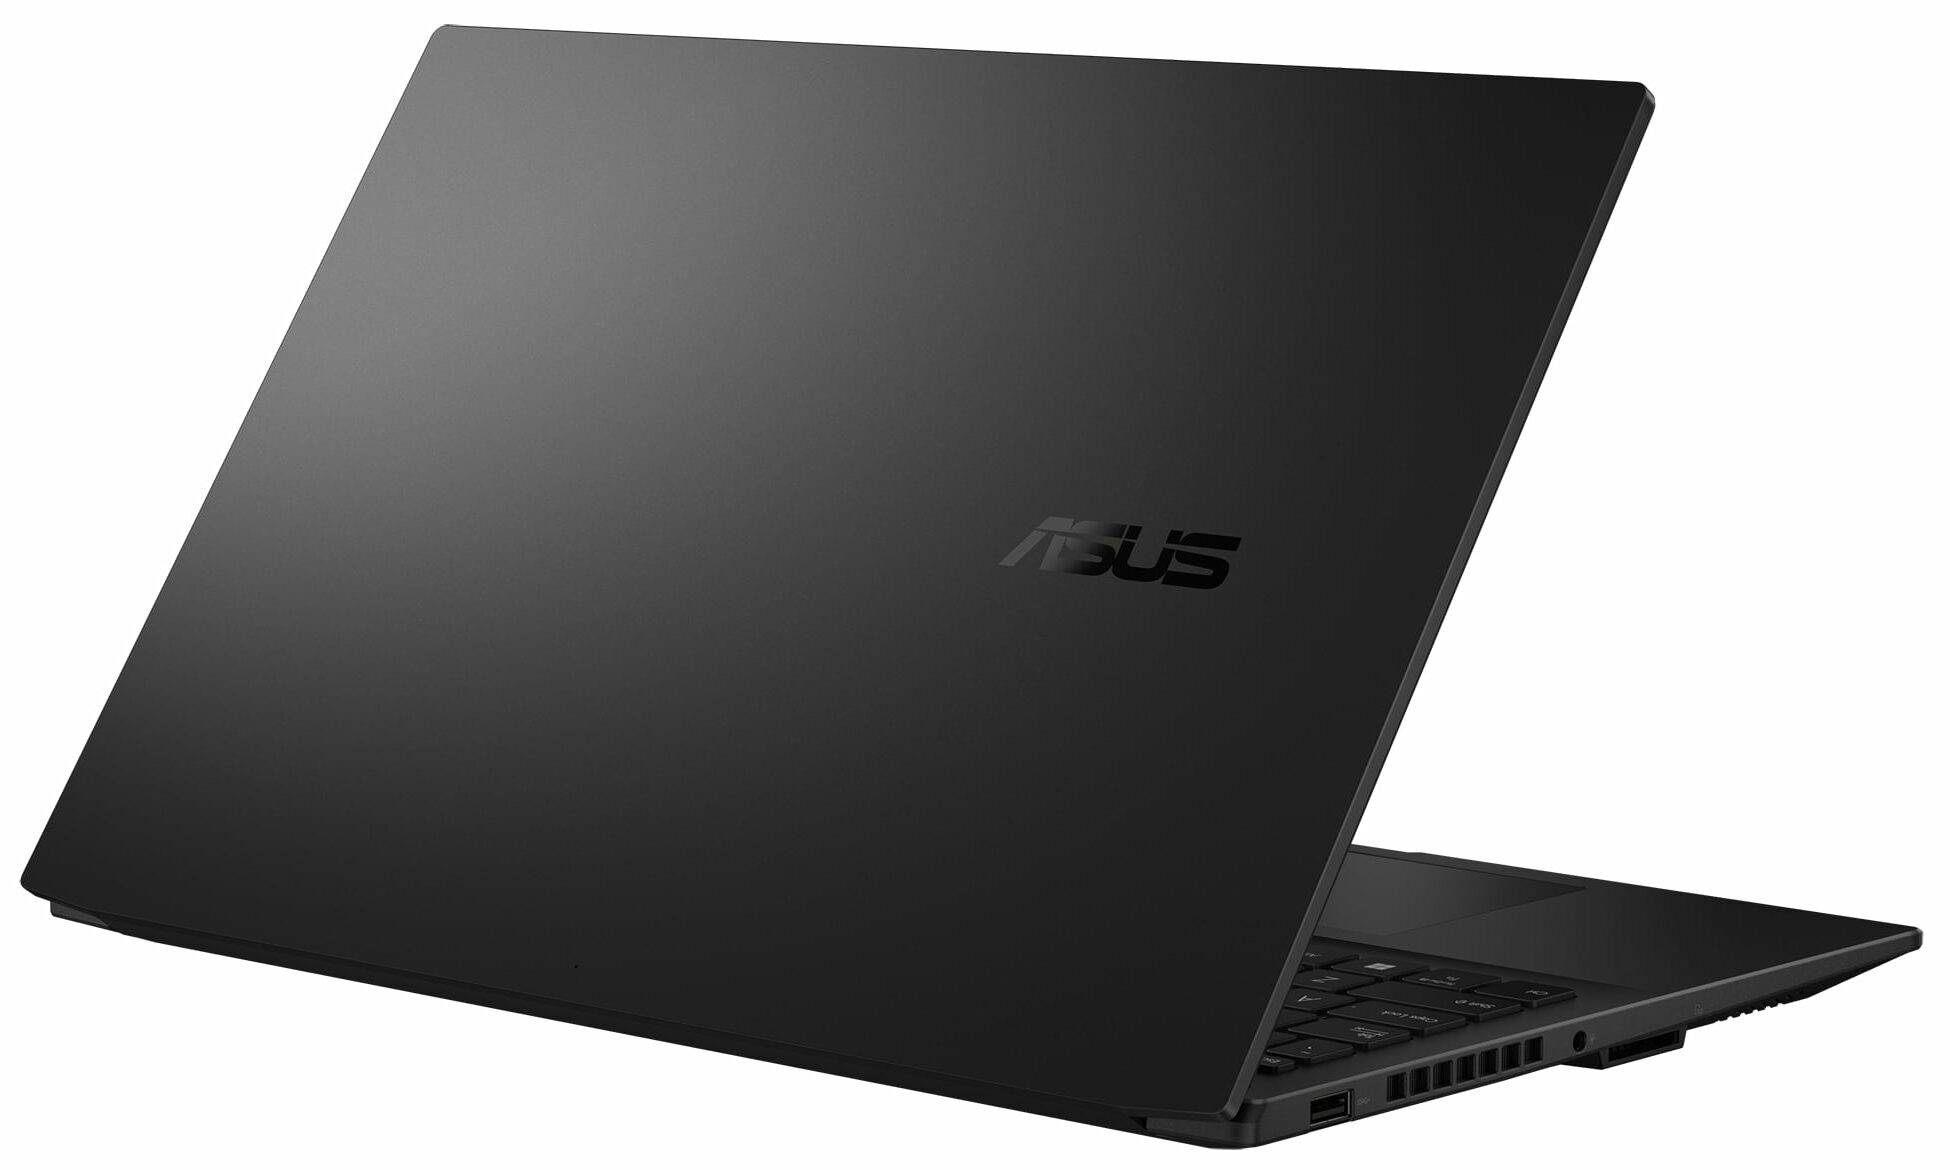 ASUS Creator Laptop Q (Q540)｜Laptops For Home｜ASUS USA